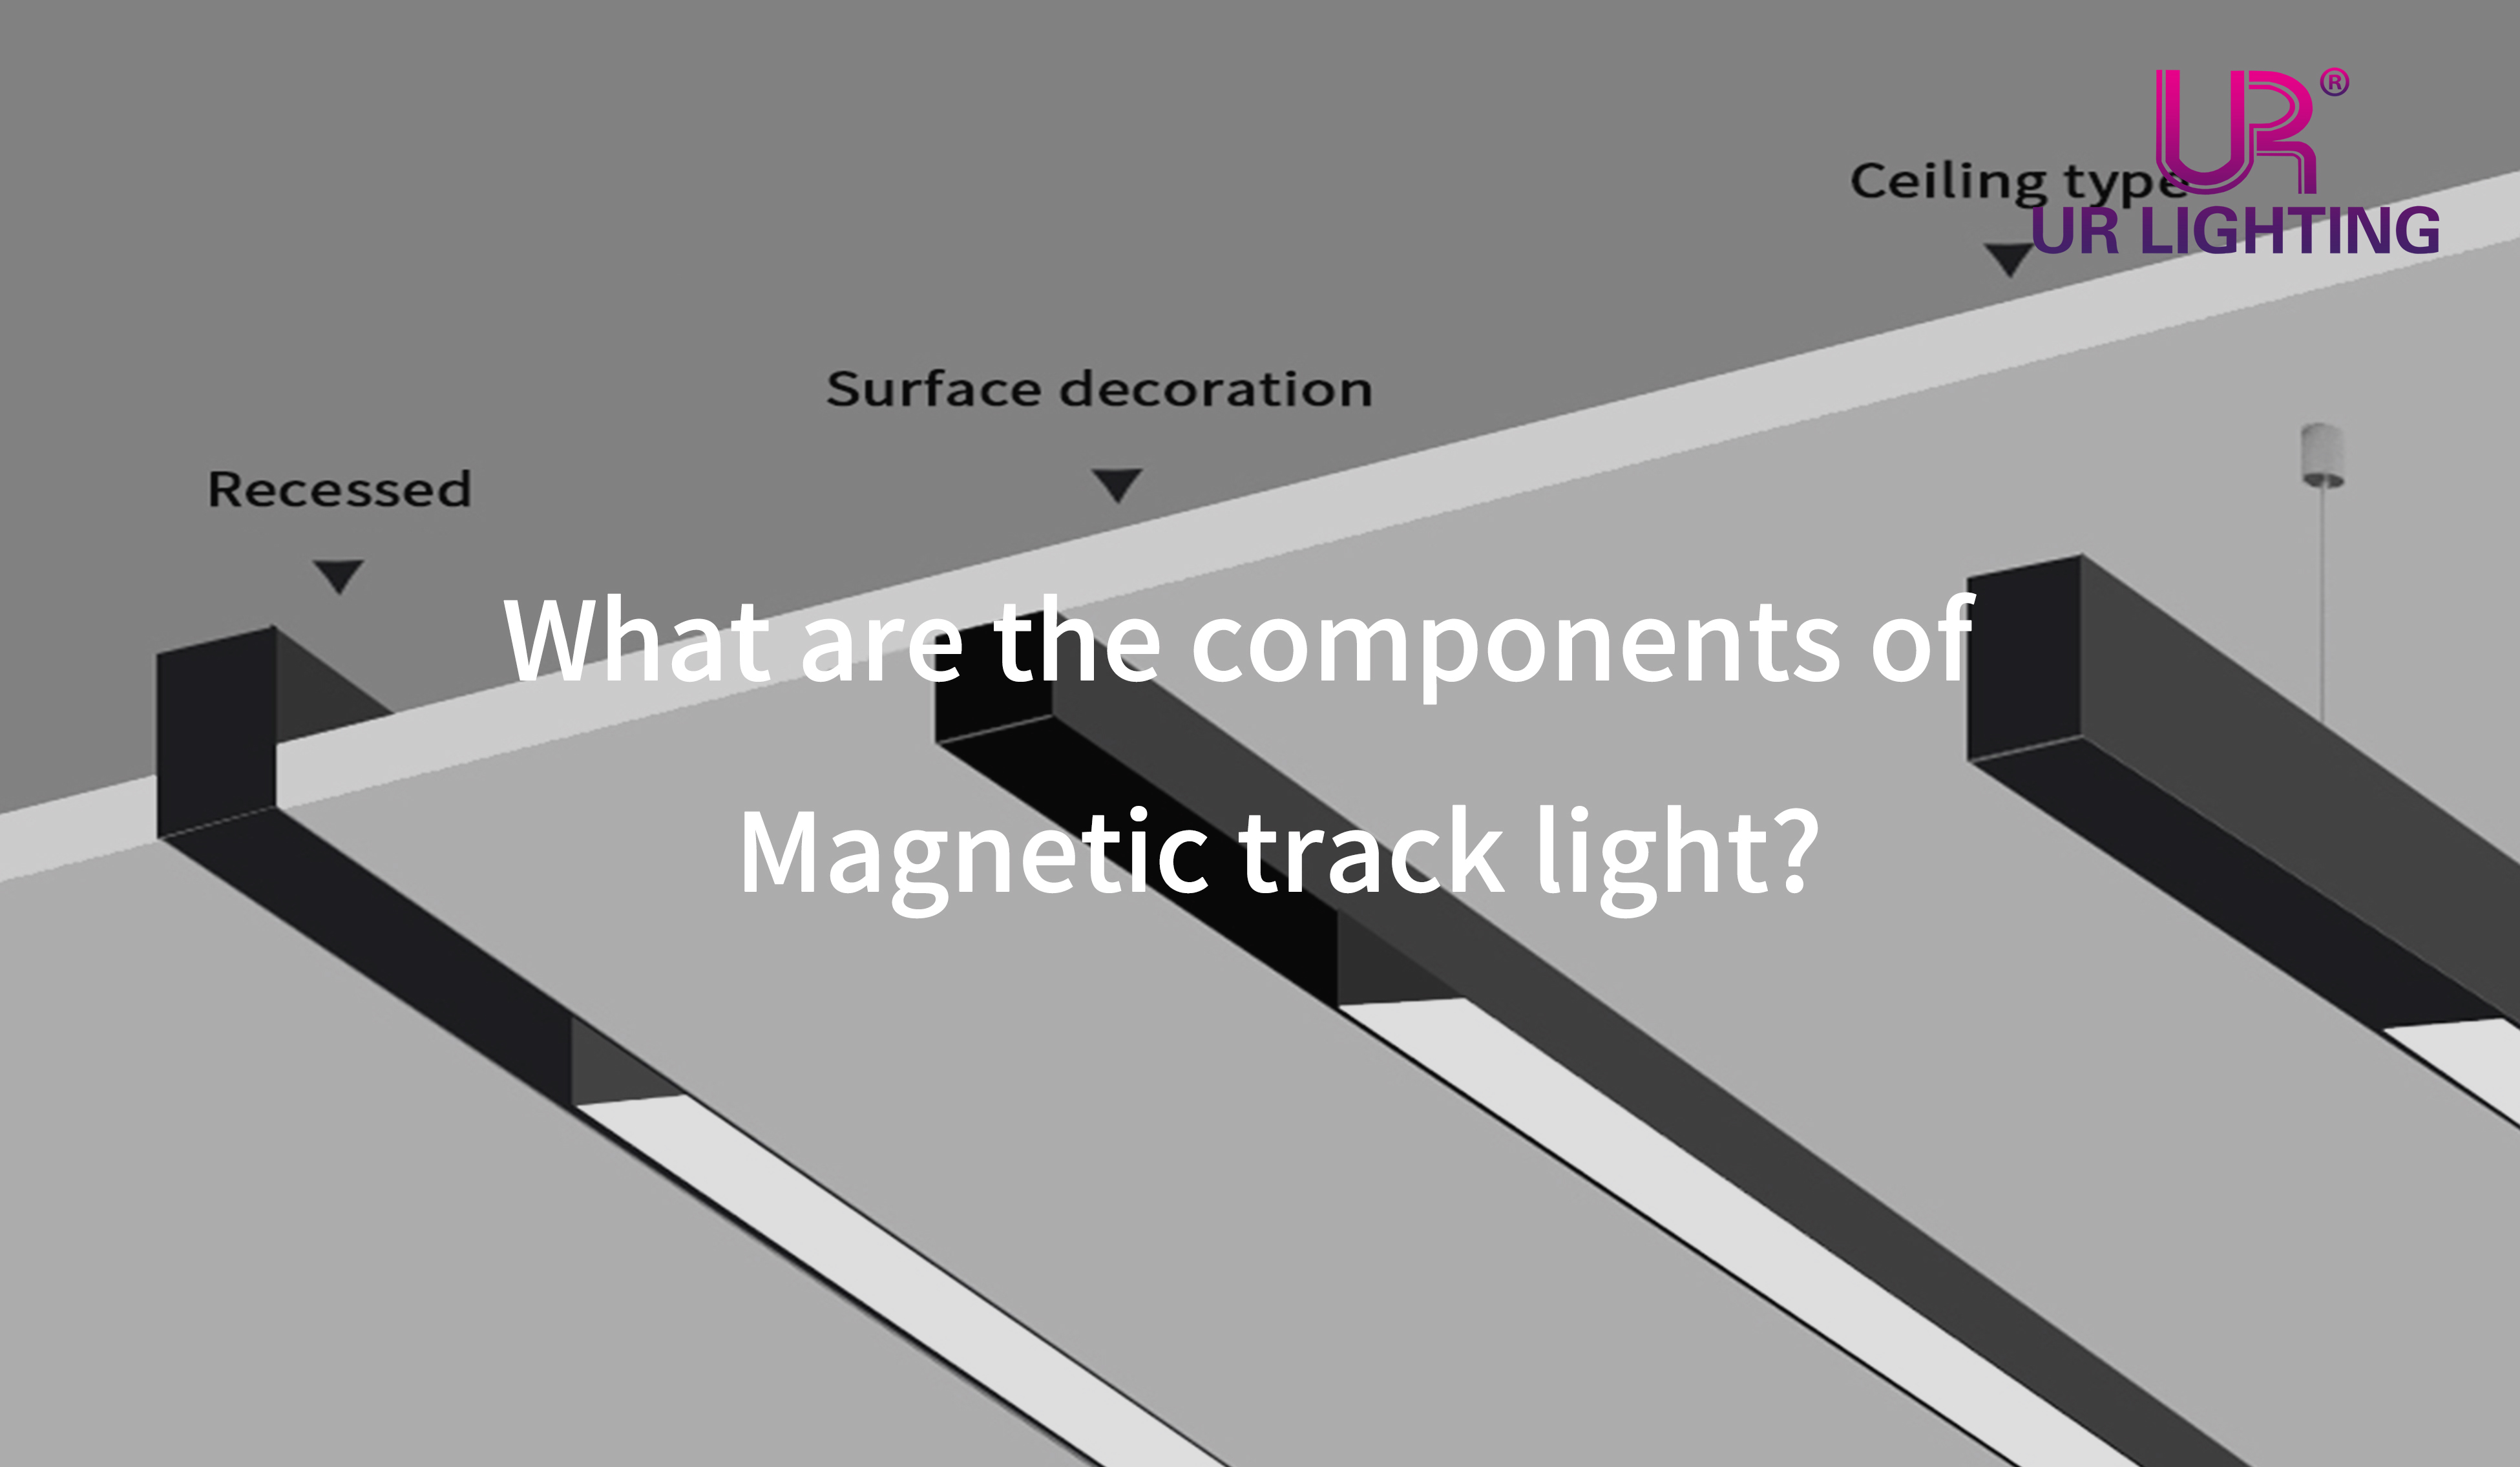 What are the components of Magnetic track light?